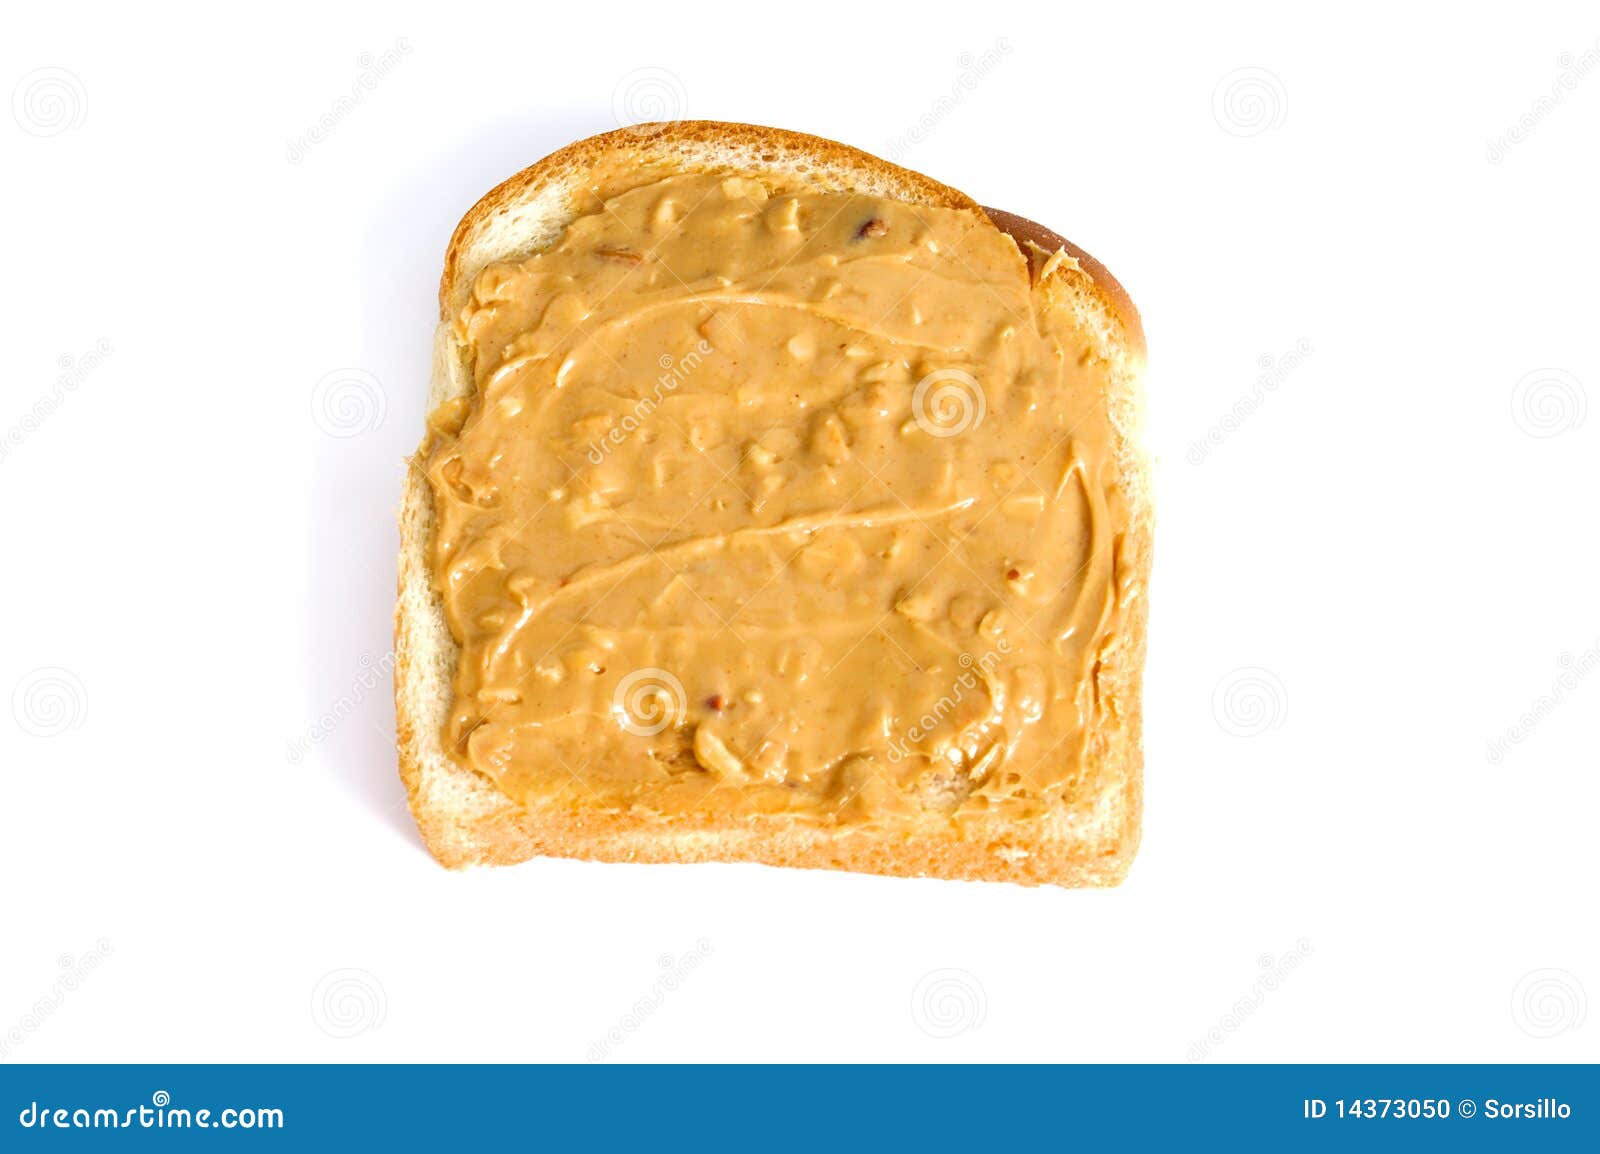 Chunky Peanut Butter Sandwich On White Stock Photo Image Of Bread Food